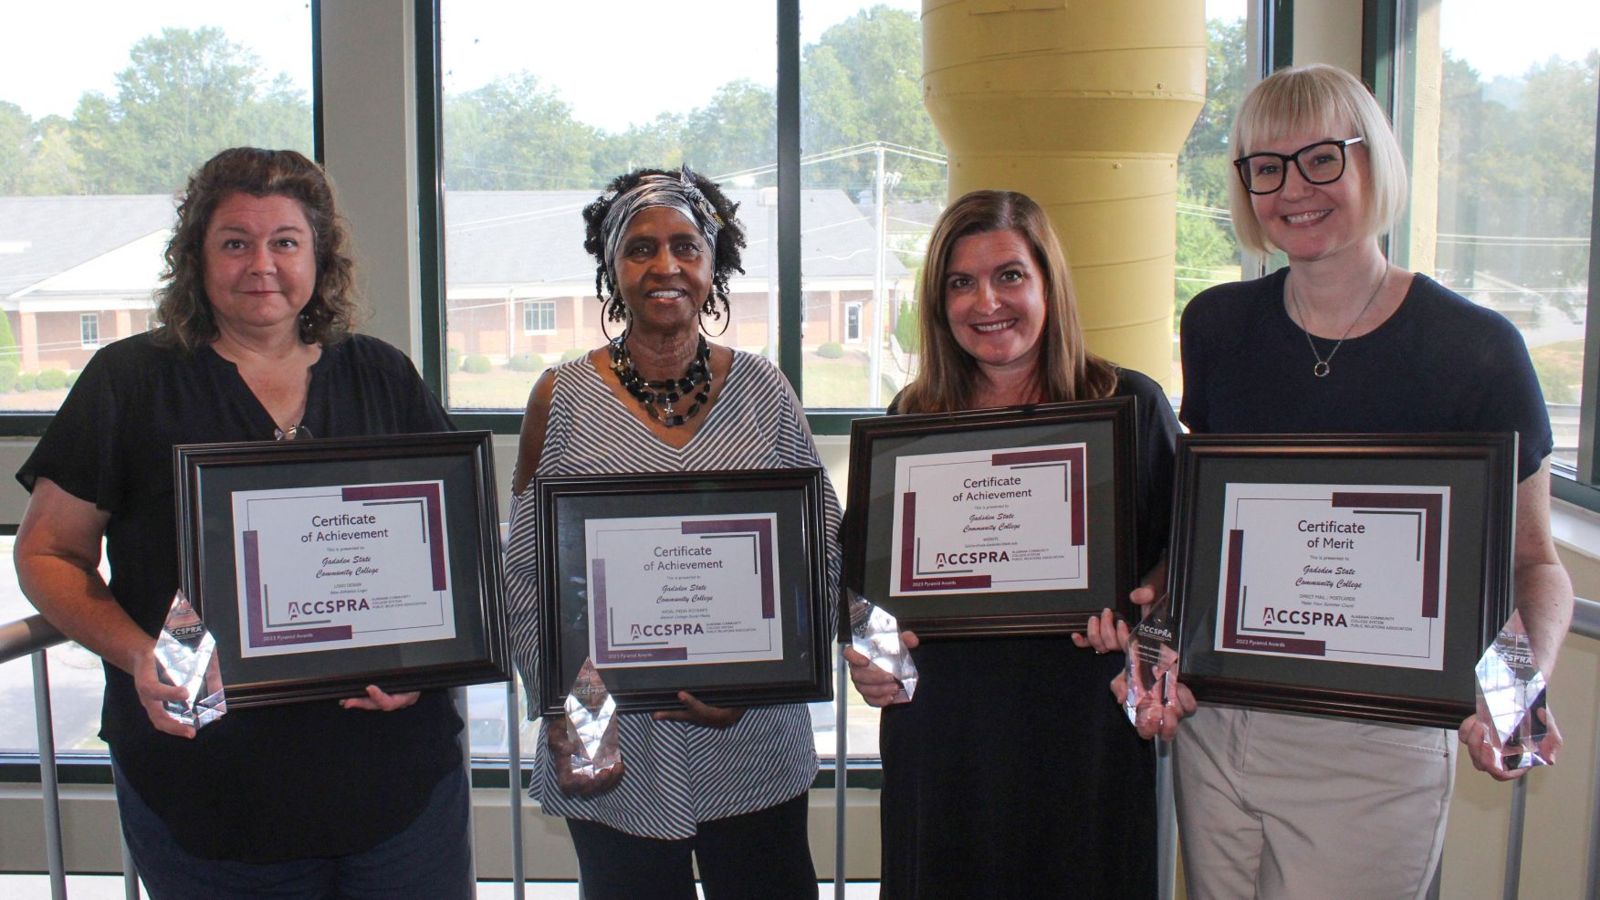 Members of the Gadsden State PR and Marketing Department hold some of the trophies earned at the ACCSPRA Conference. From left to right are Brandy Hyatt, public relations and marketing specialist; Kathy Brown, administrative assistant; Jackie Edmondson, director; and Laura Catoe, web design/social media specialist.